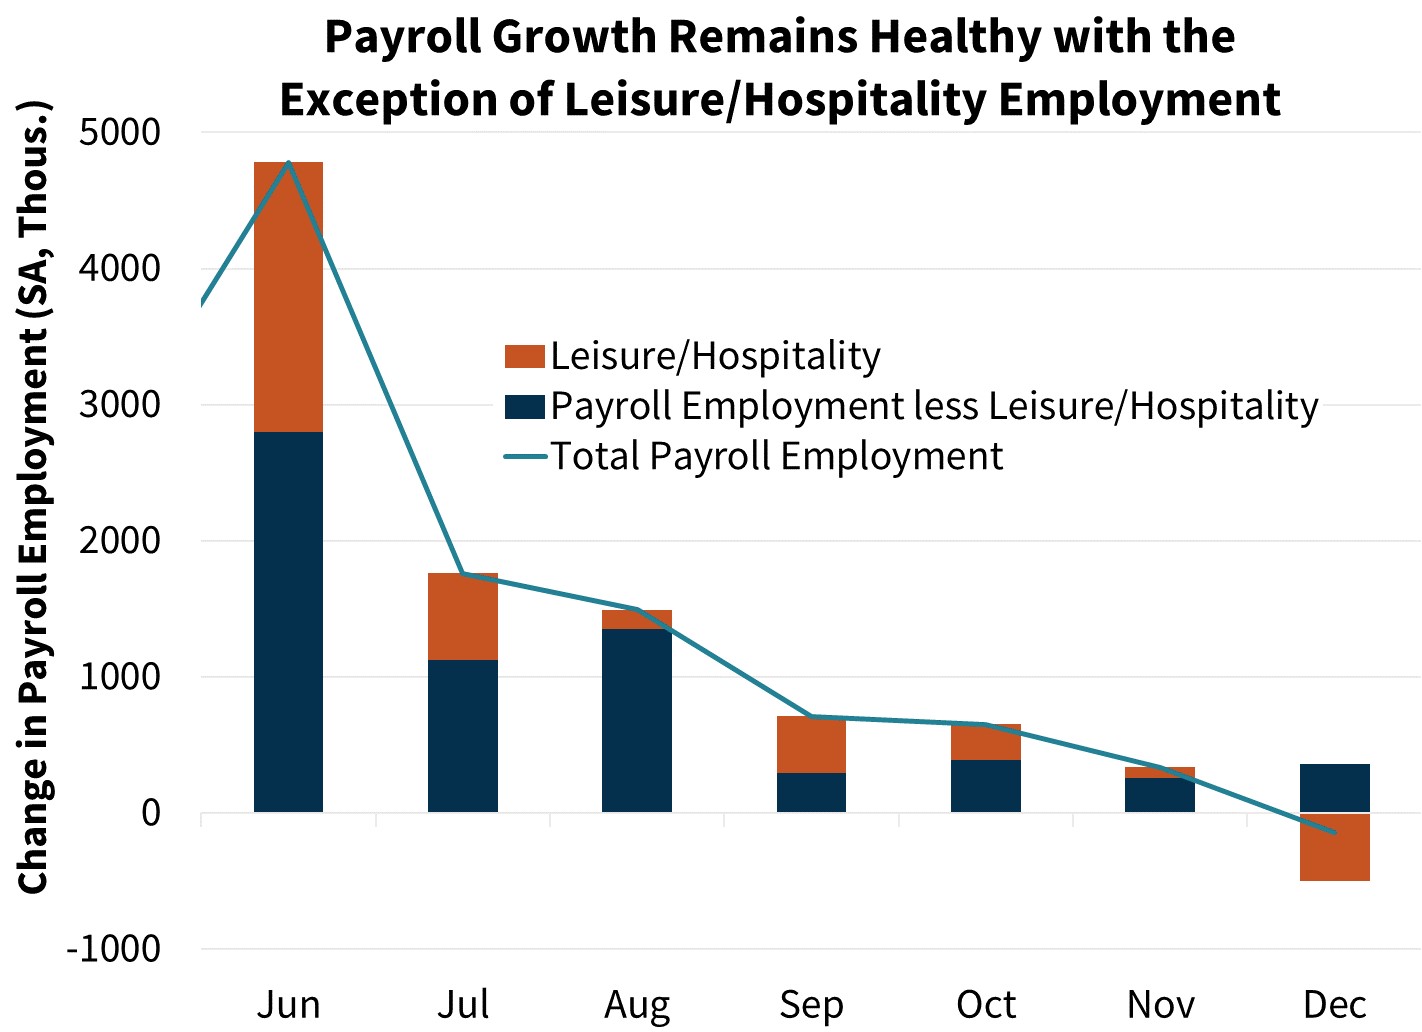  Payroll Growth Remains Healthy with the Exception of Leisure/Hospitality Employment 